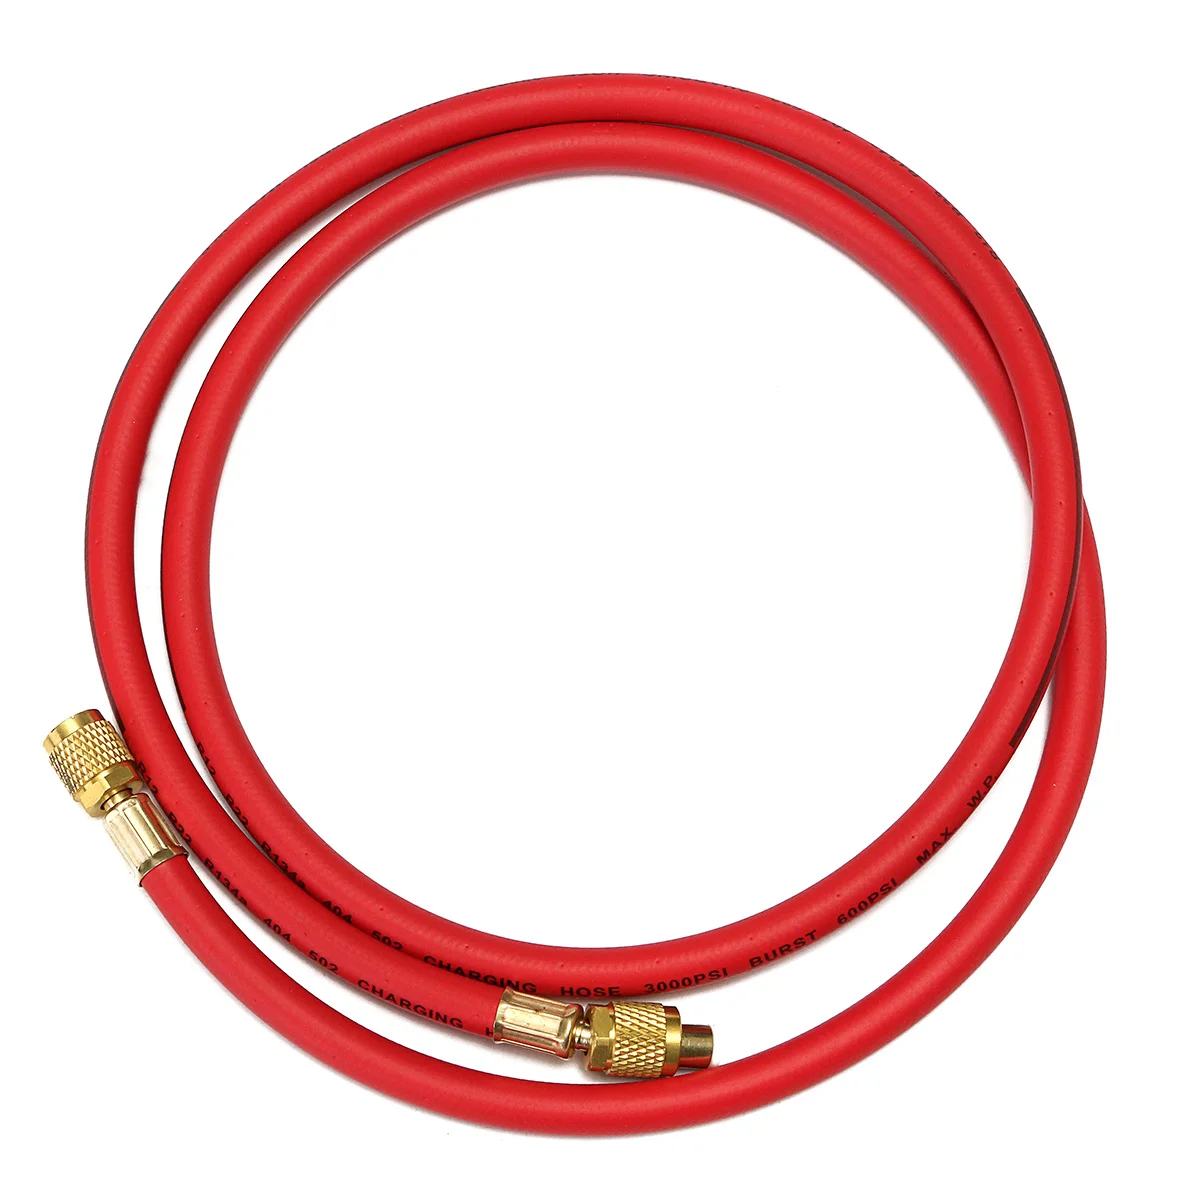 

1Pc R134a R22 R410a Refrigeration Charging Hoses 1/4" SAE Female Manifold Gauge Set For Air Conditioner Red/Blue/Yellow